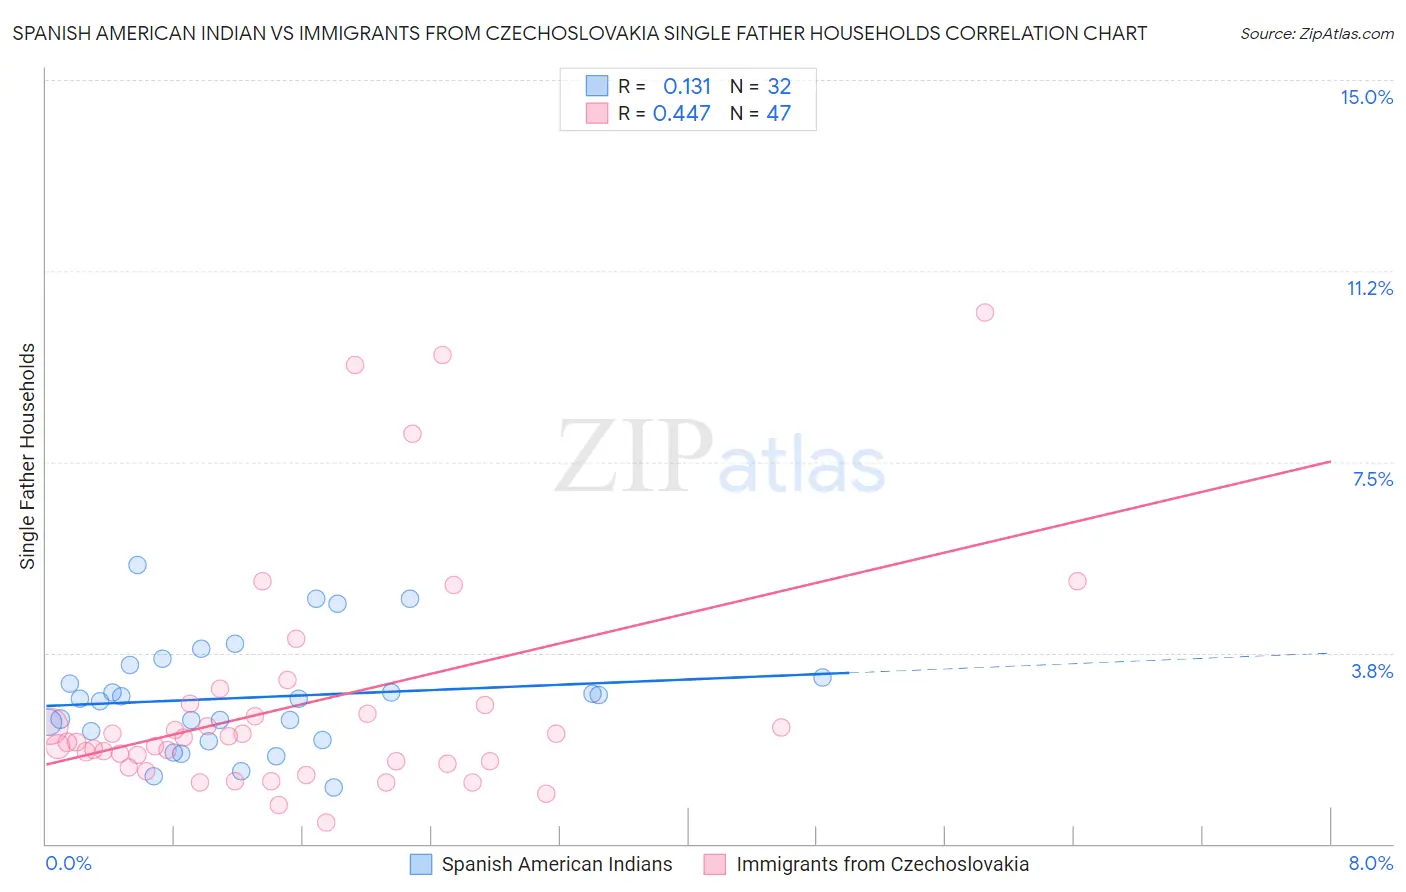 Spanish American Indian vs Immigrants from Czechoslovakia Single Father Households